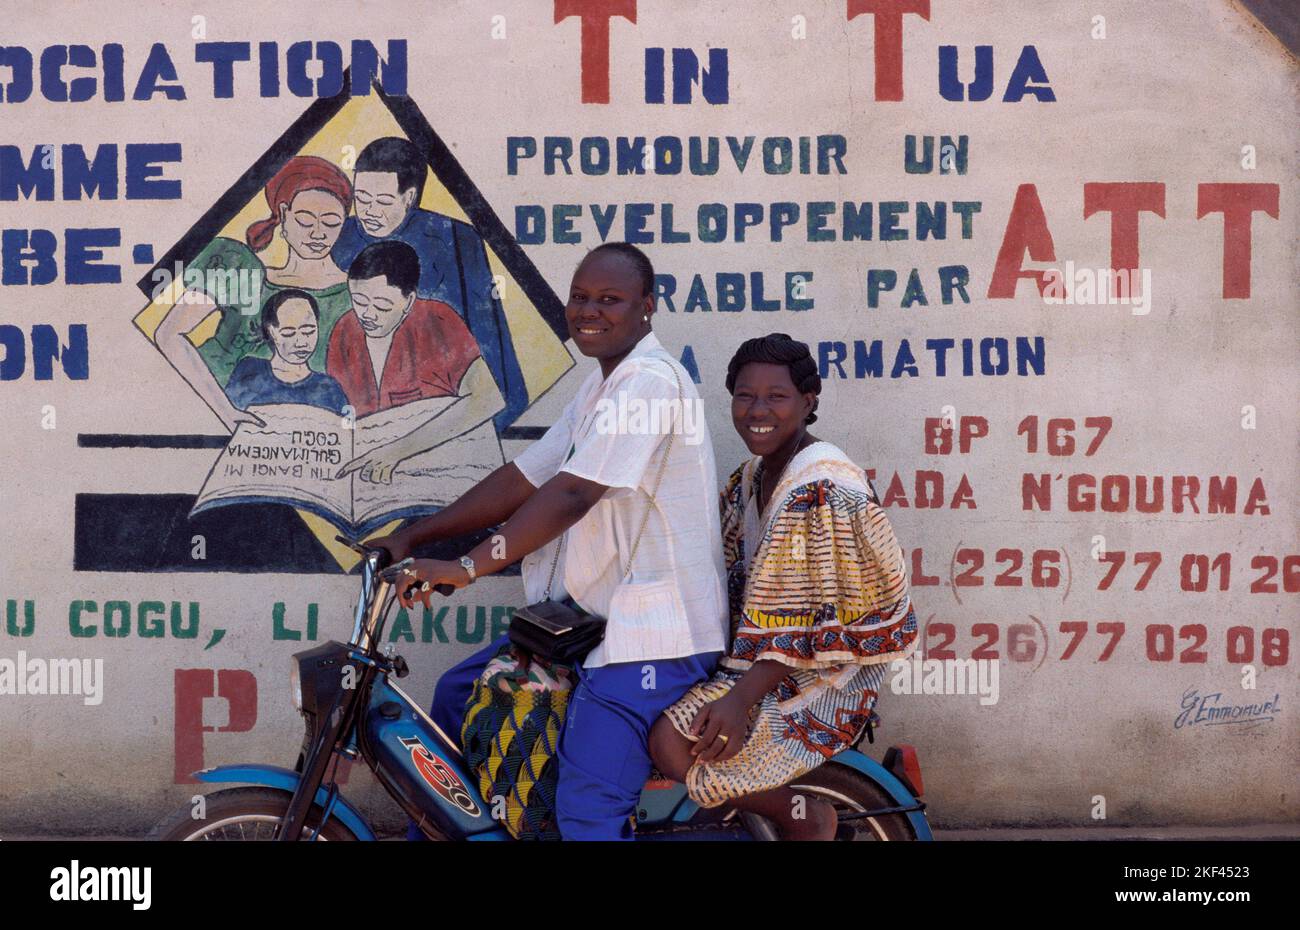 Burkina Faso, Fada N'Gourma. Two young women on a moped in front of a mural of Tin Tua, an organisation on rural development. Stock Photo